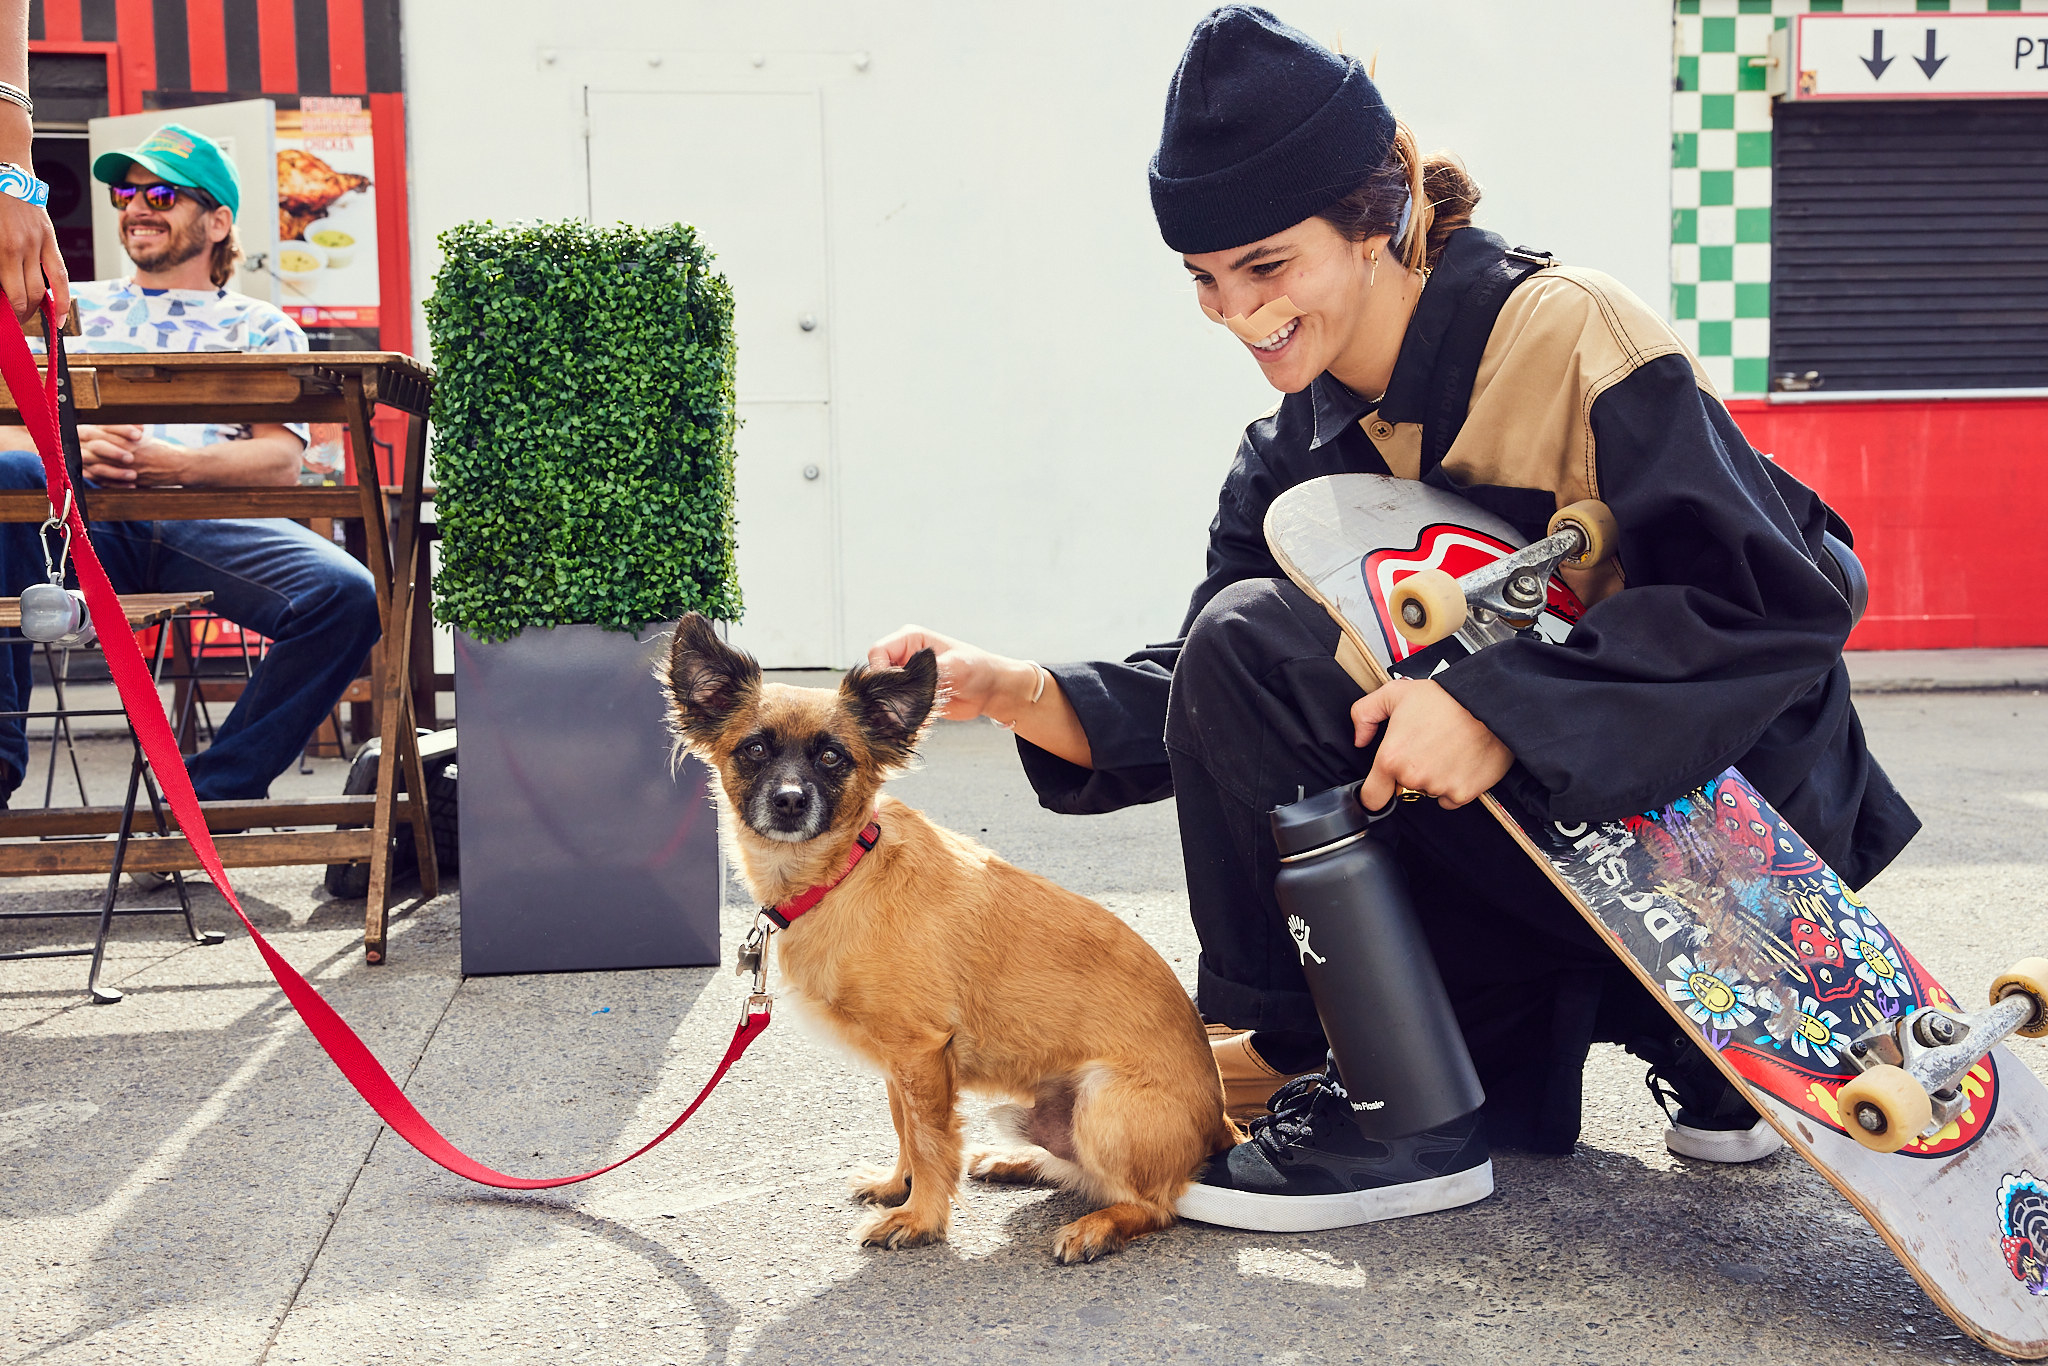 Skater and influencer Brooklinn Khoury kneeling with her skateboard and petting a small dog